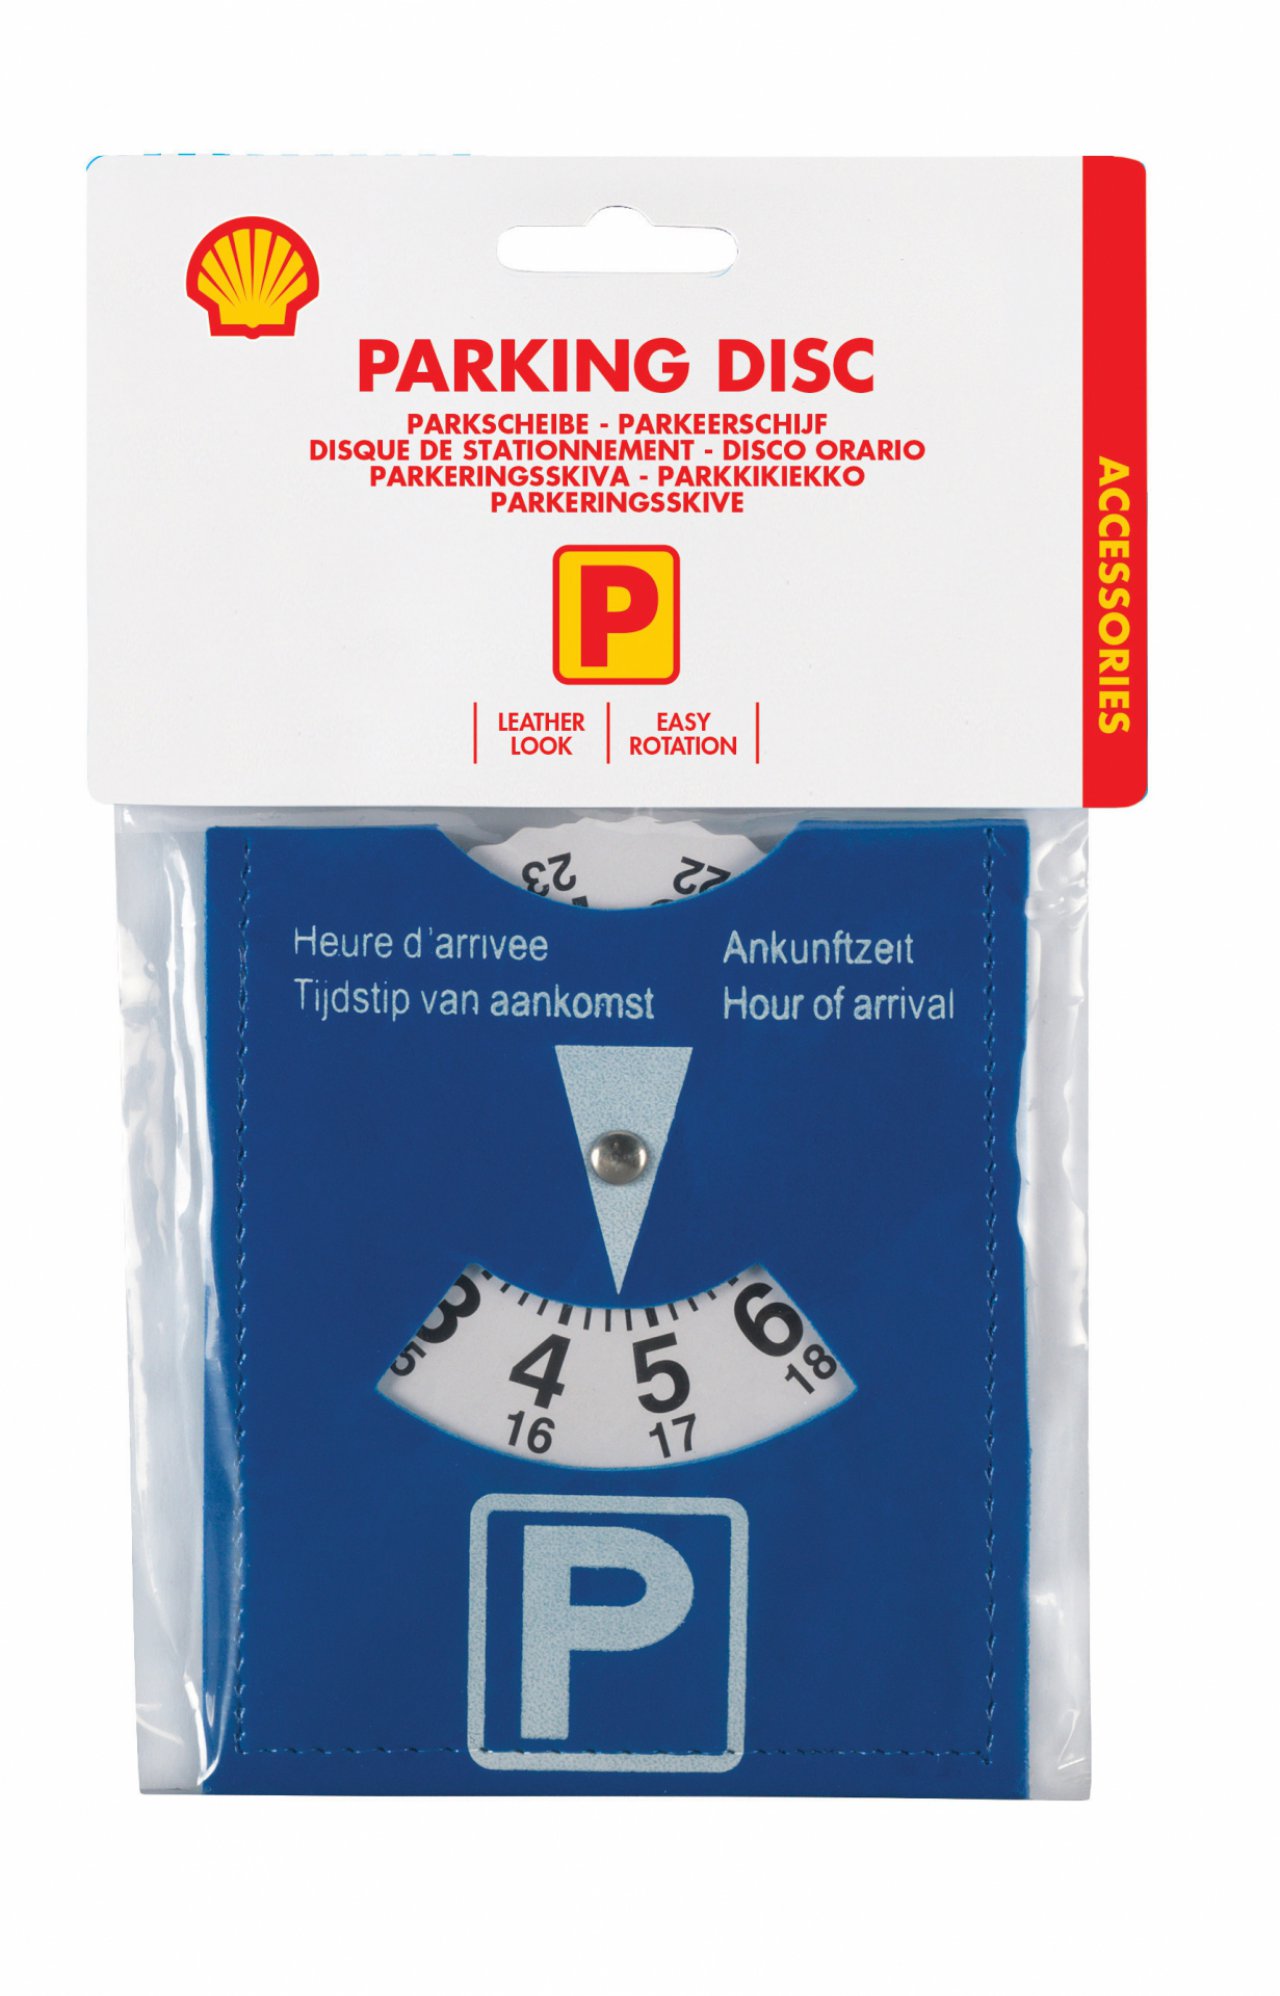 Parking Disc  Shell Car Care by Kemetyl